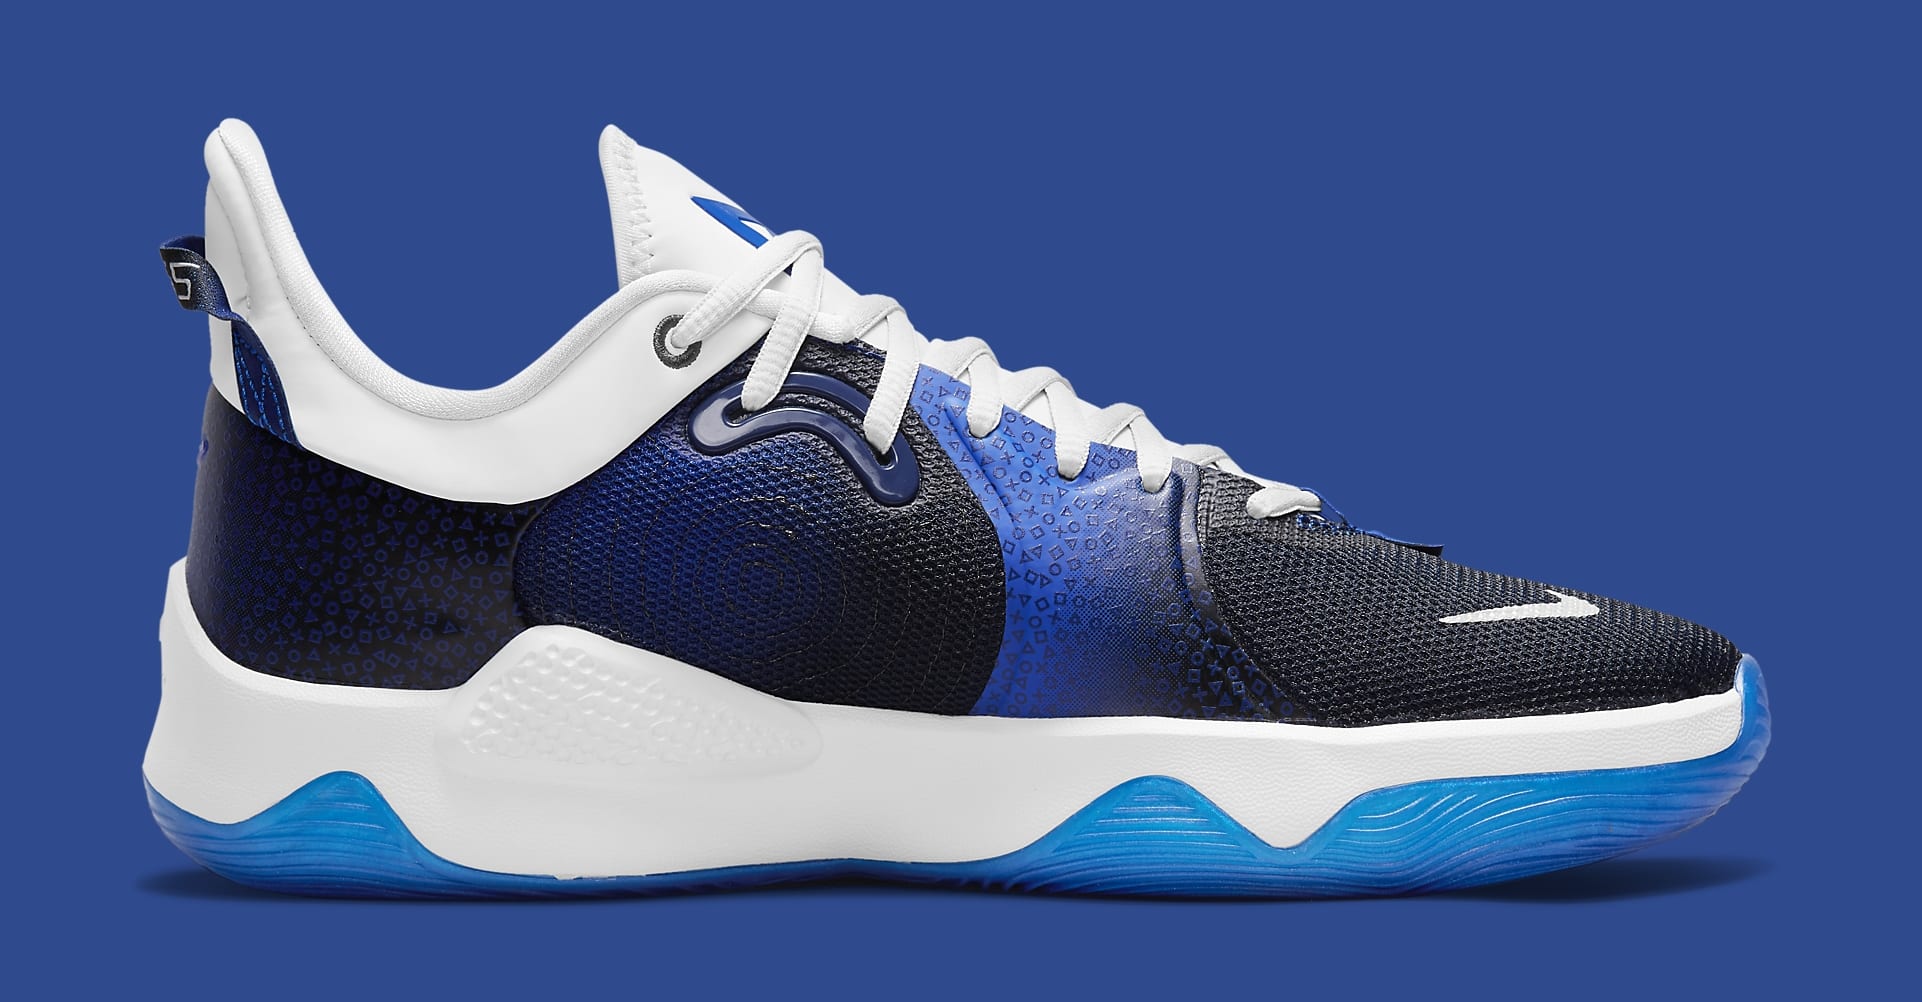 Playstation x Nike PG 5 'PS5' Blue CW3144-400 Medial